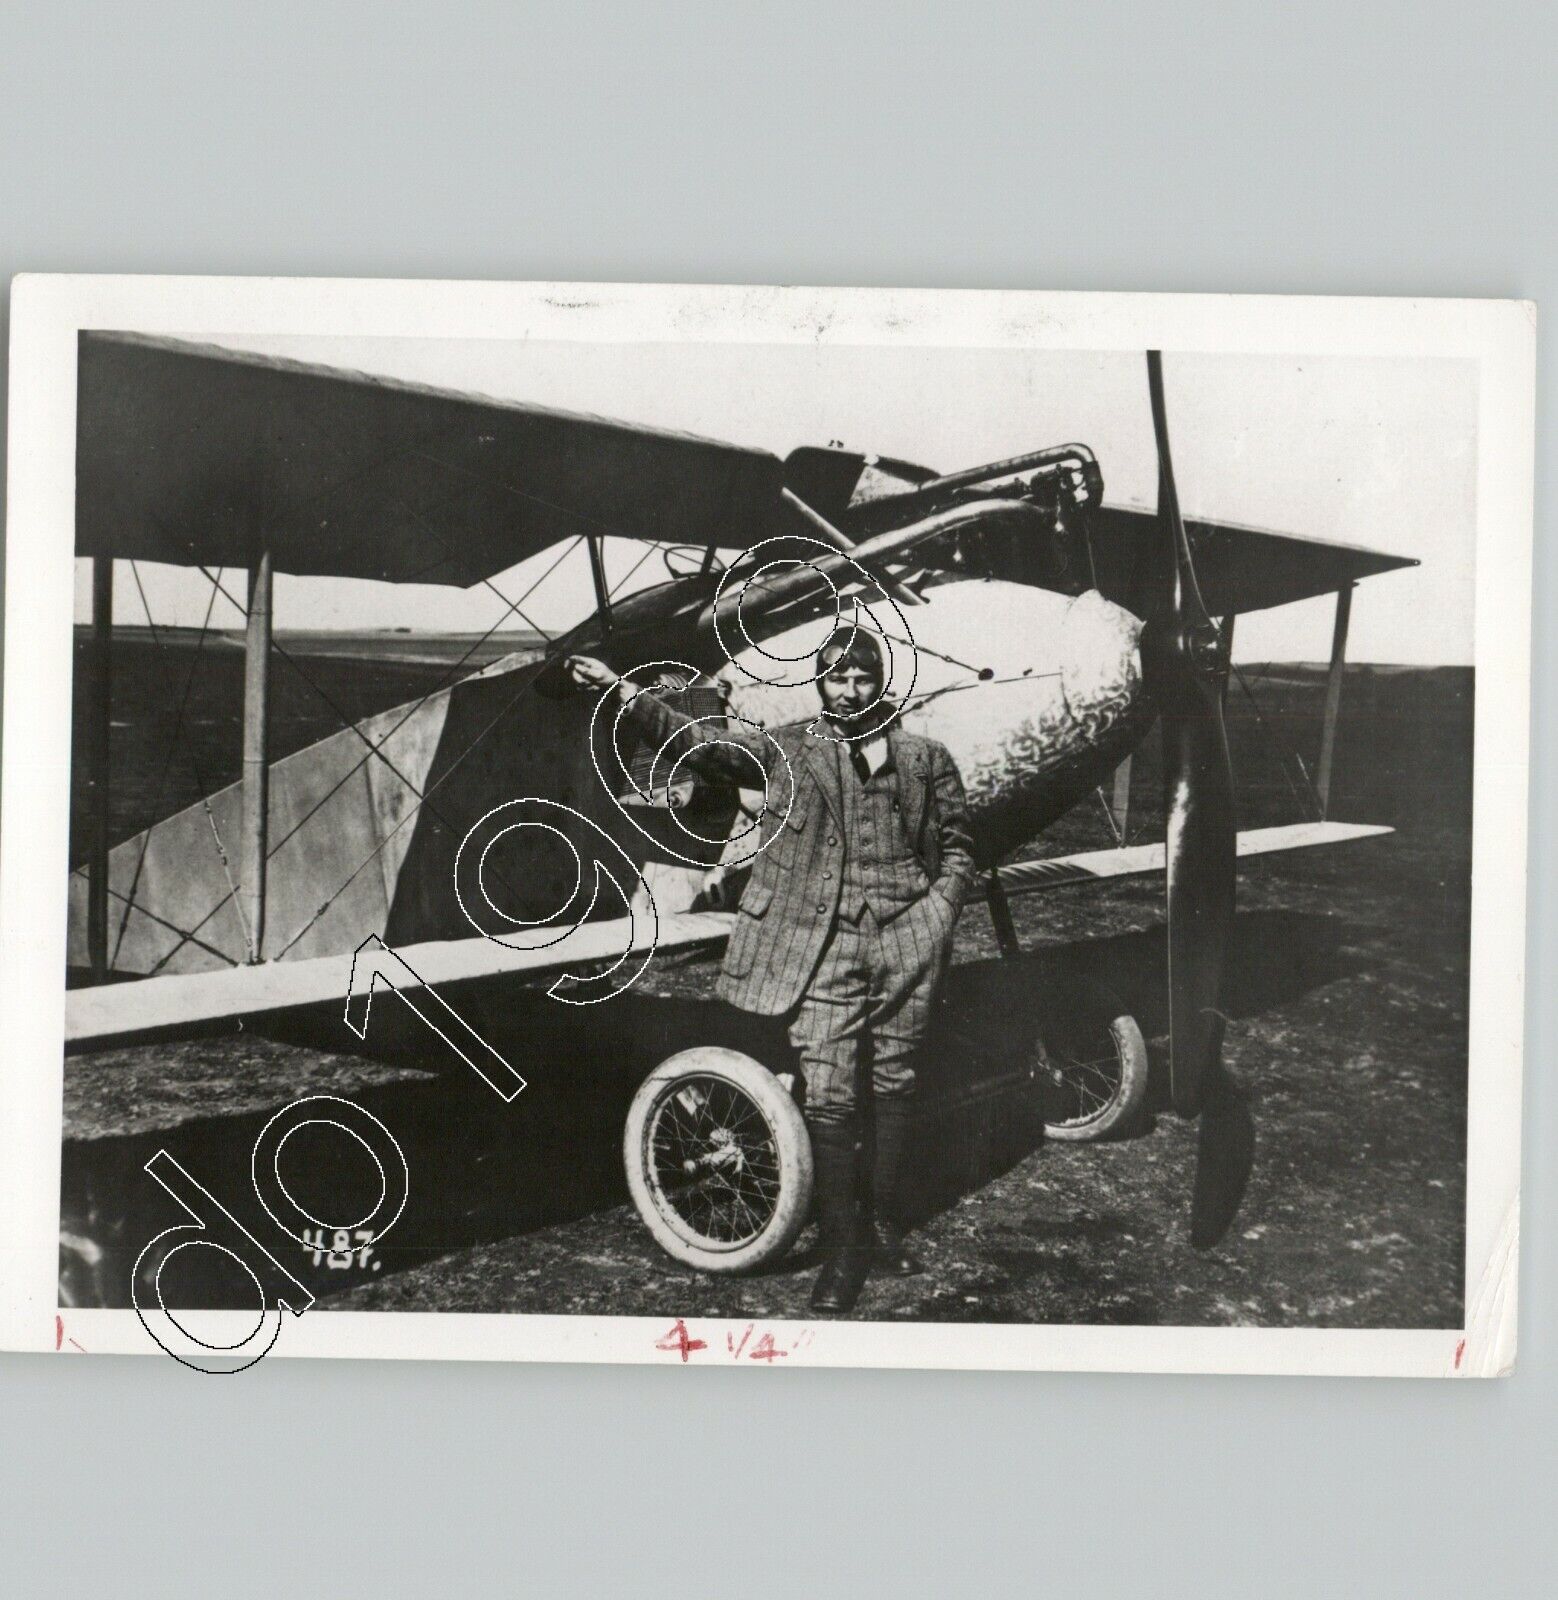 WWI Pilot with Anthony FOKKER Fighter AIRCRAFT Press Photo 1917 Printed Later